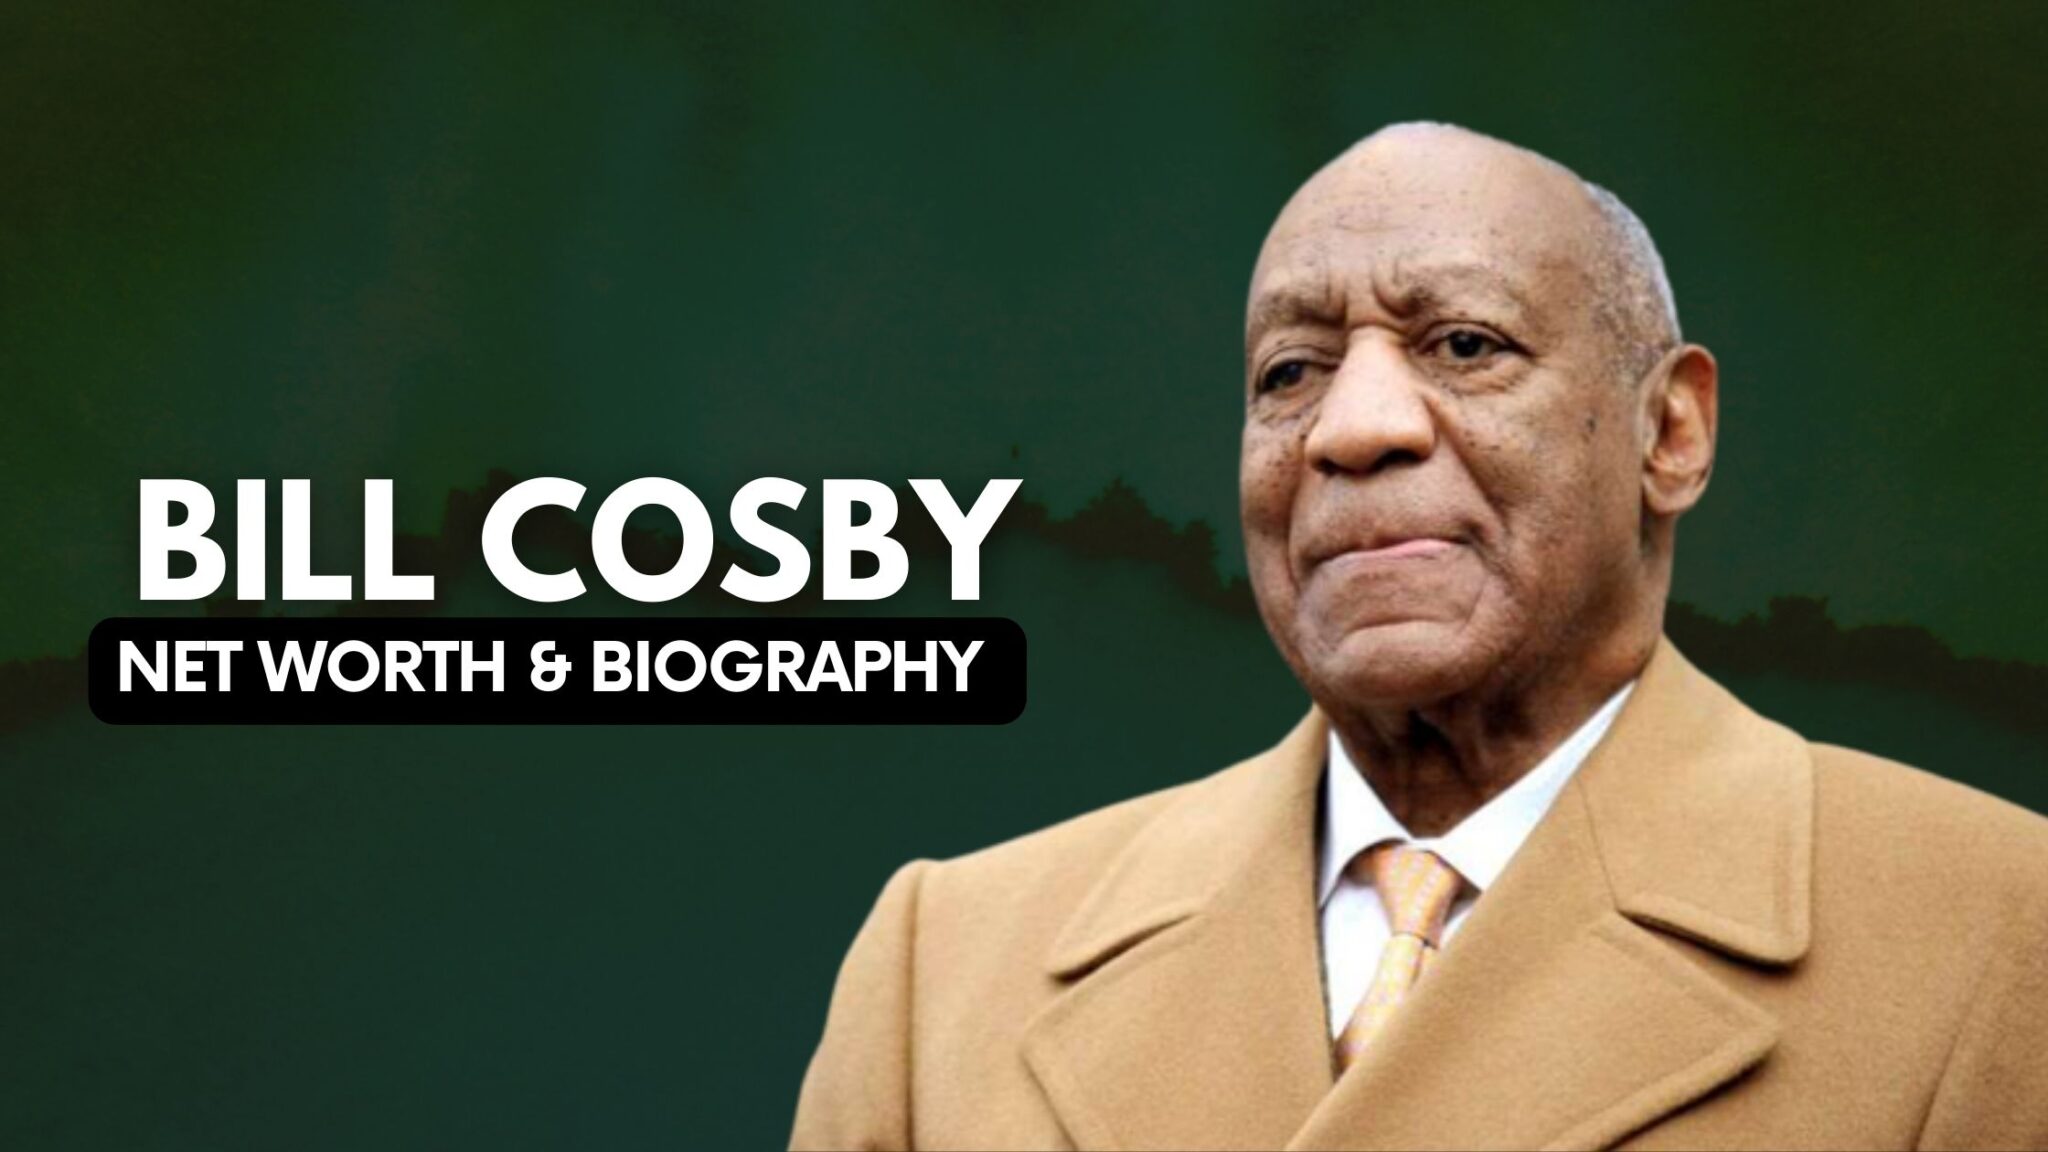 Bill Cosby Net Worth and Biography